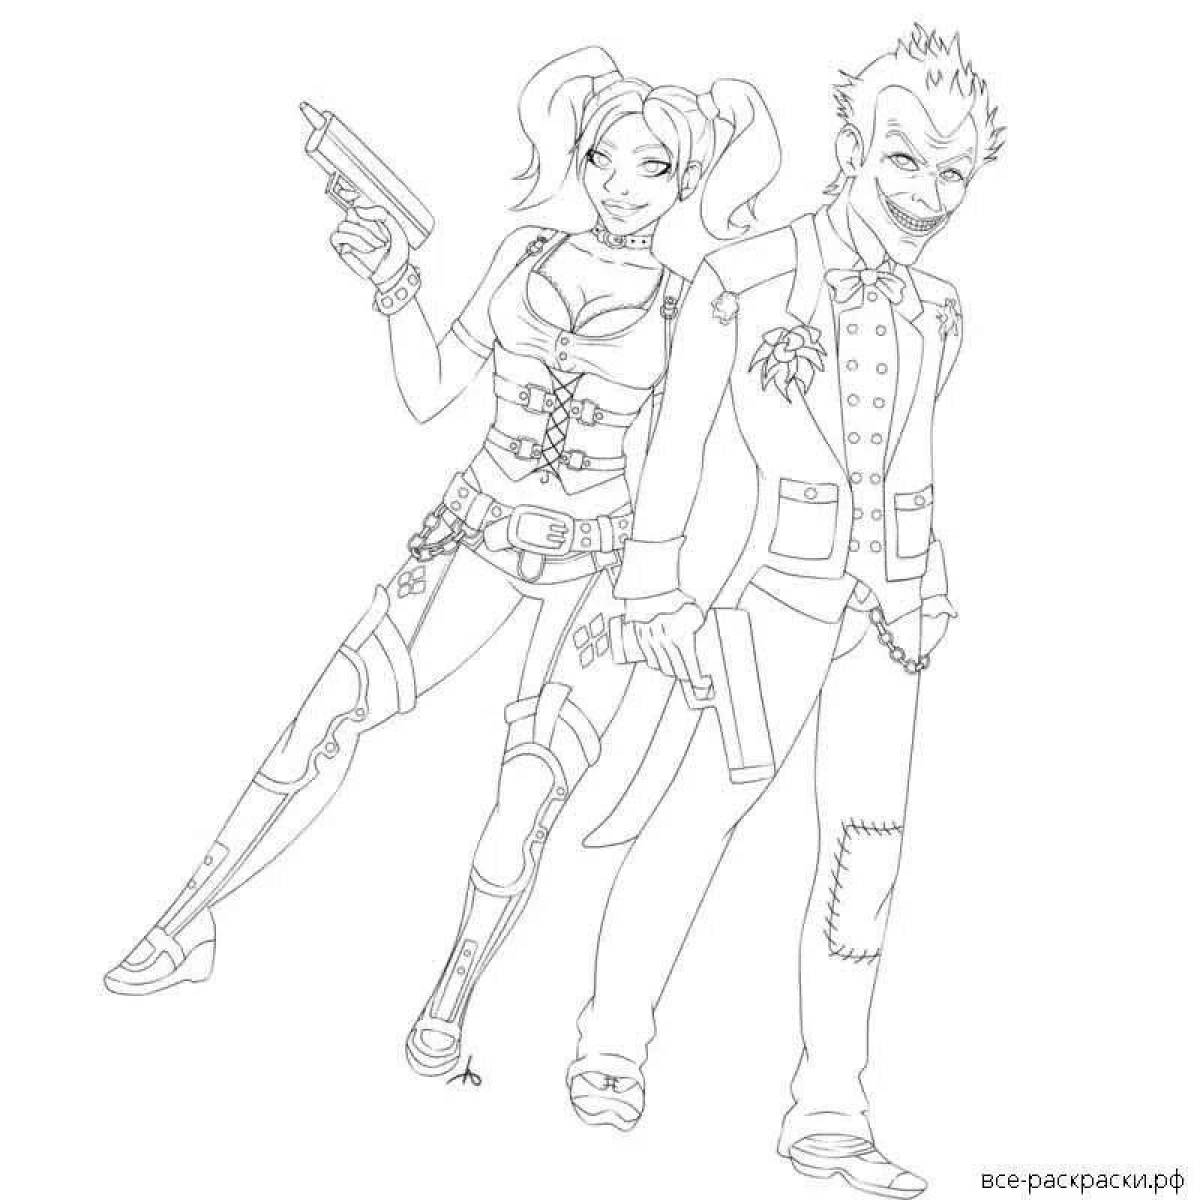 Coloring book amazing joker and harley quinn